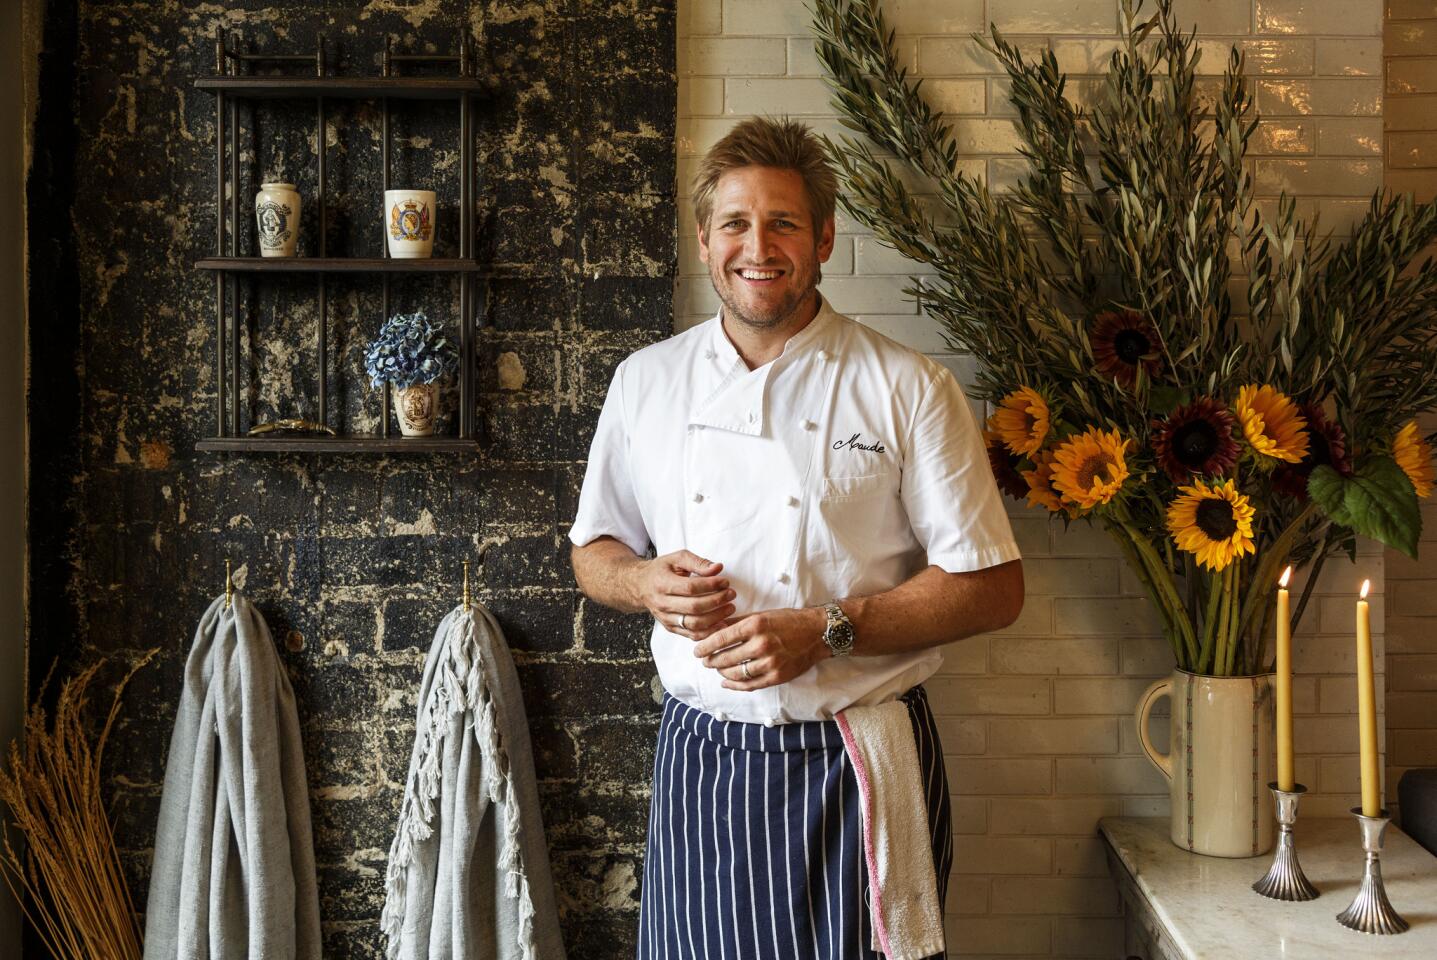 Celebrity chef Curtis Stone is shown at Maude, his first restaurant, located in Beverly Hills.